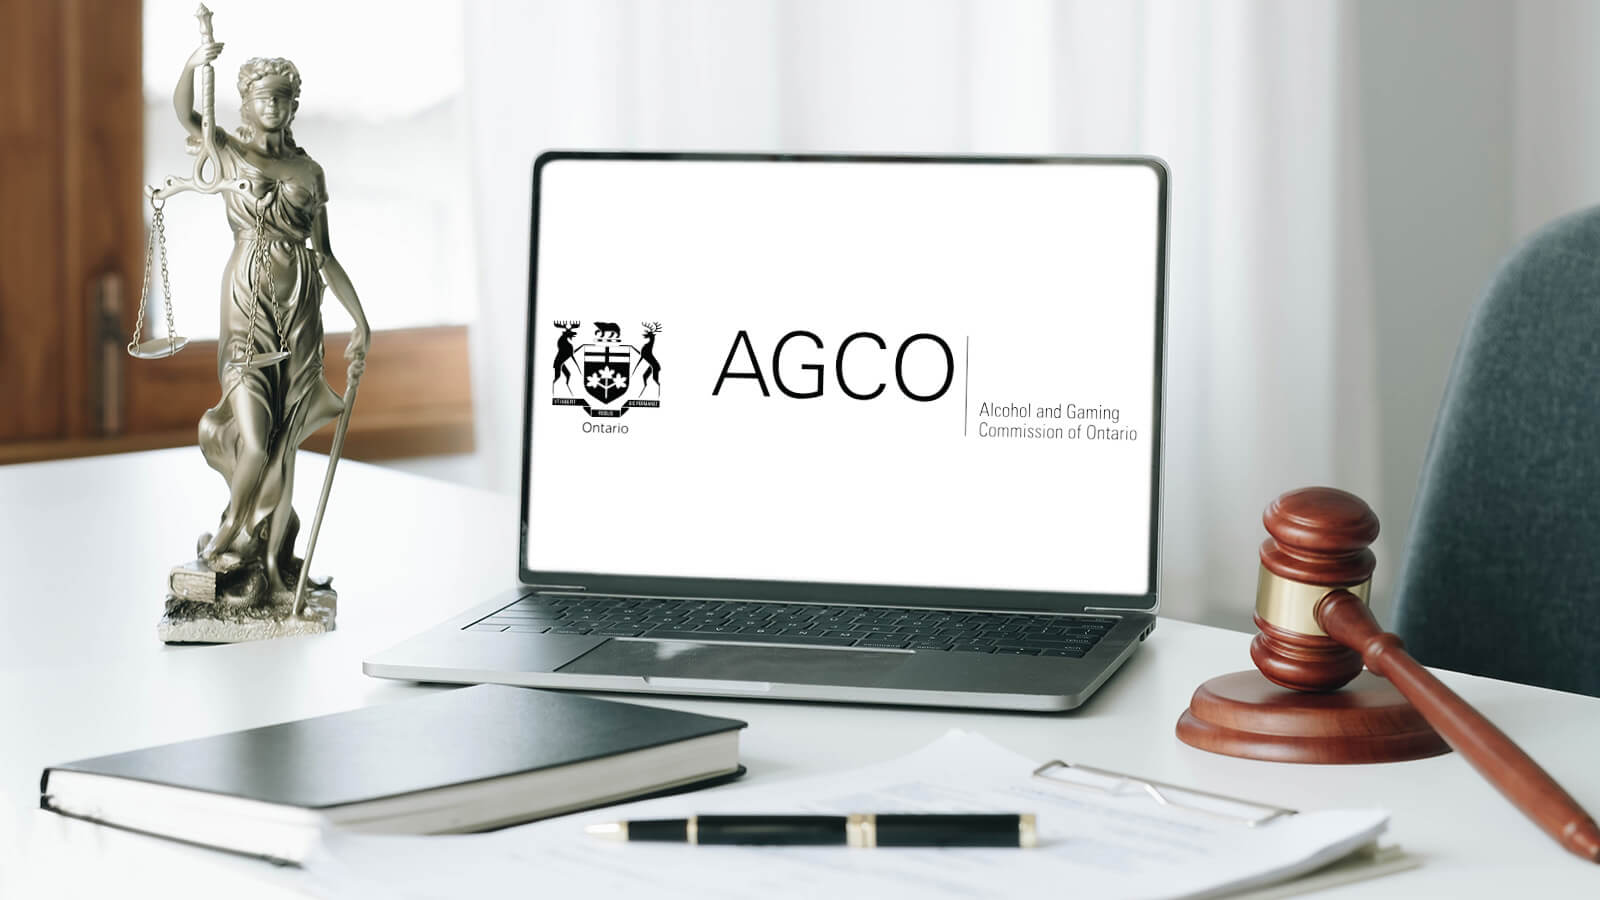 How can an online casino get an AGCO-approved licence